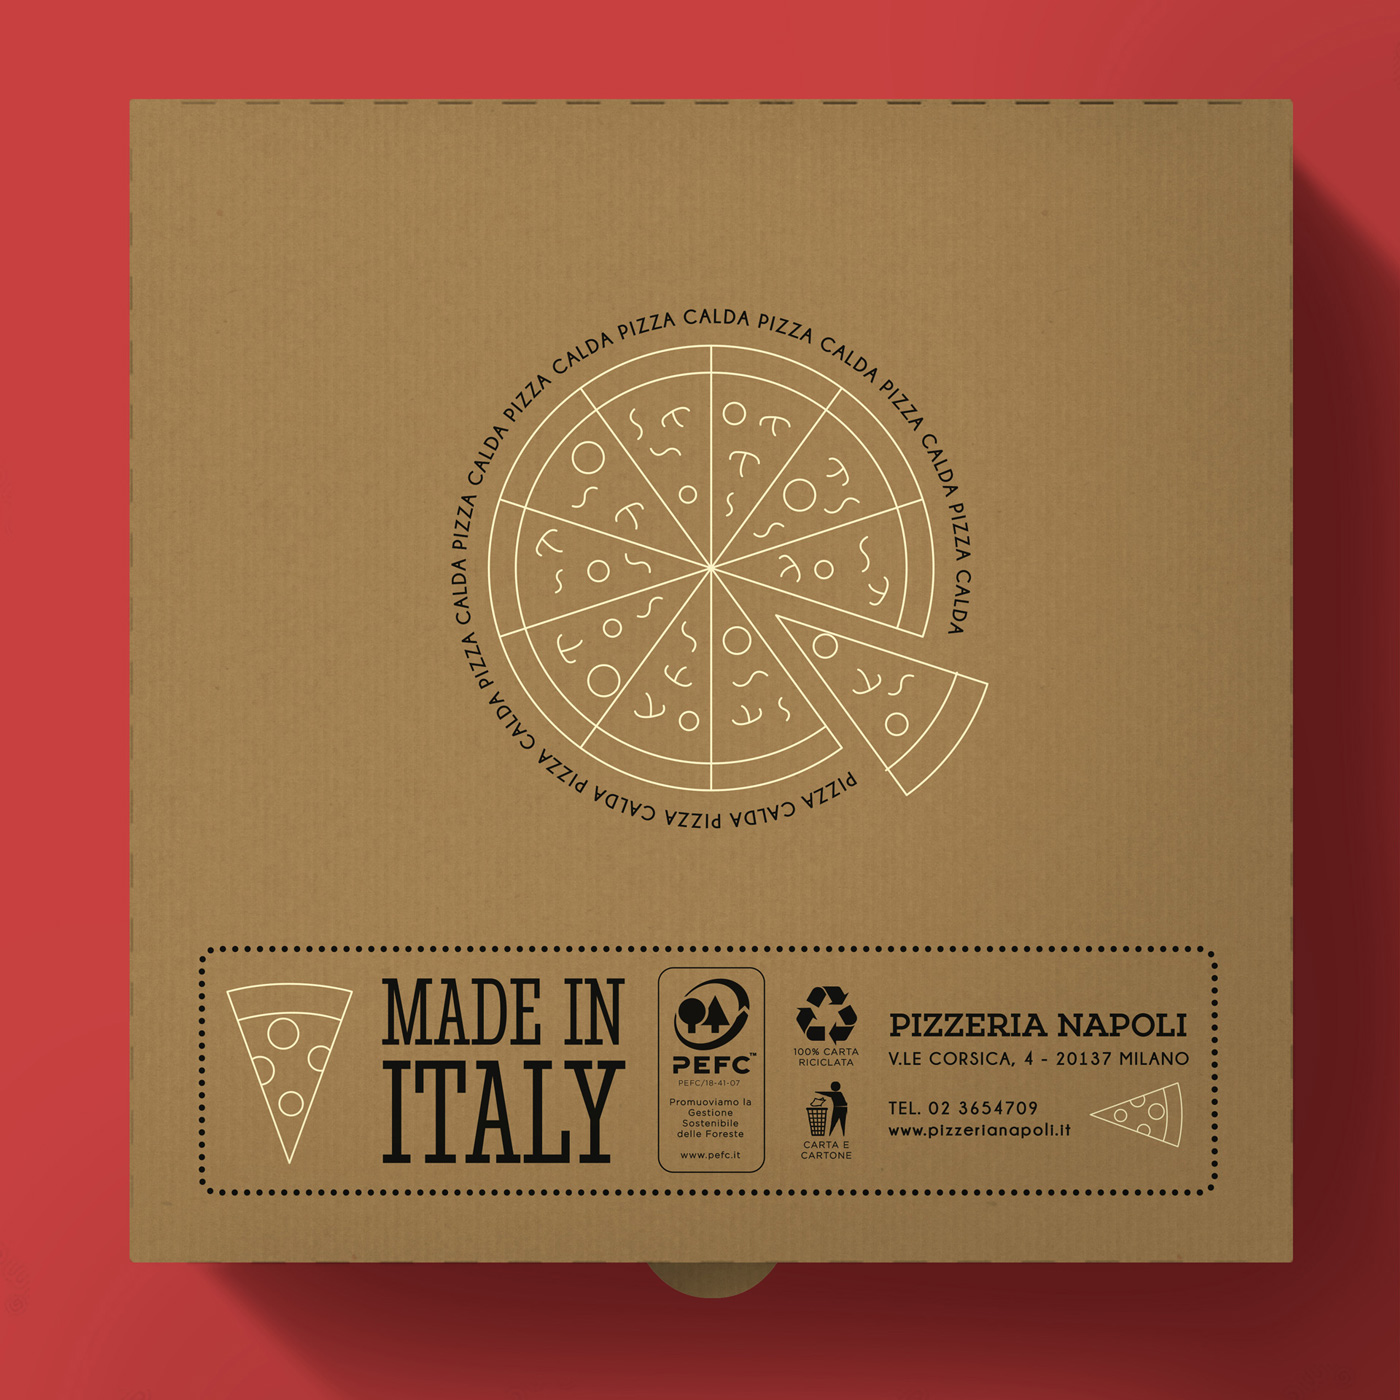 back of the pizza box with informations